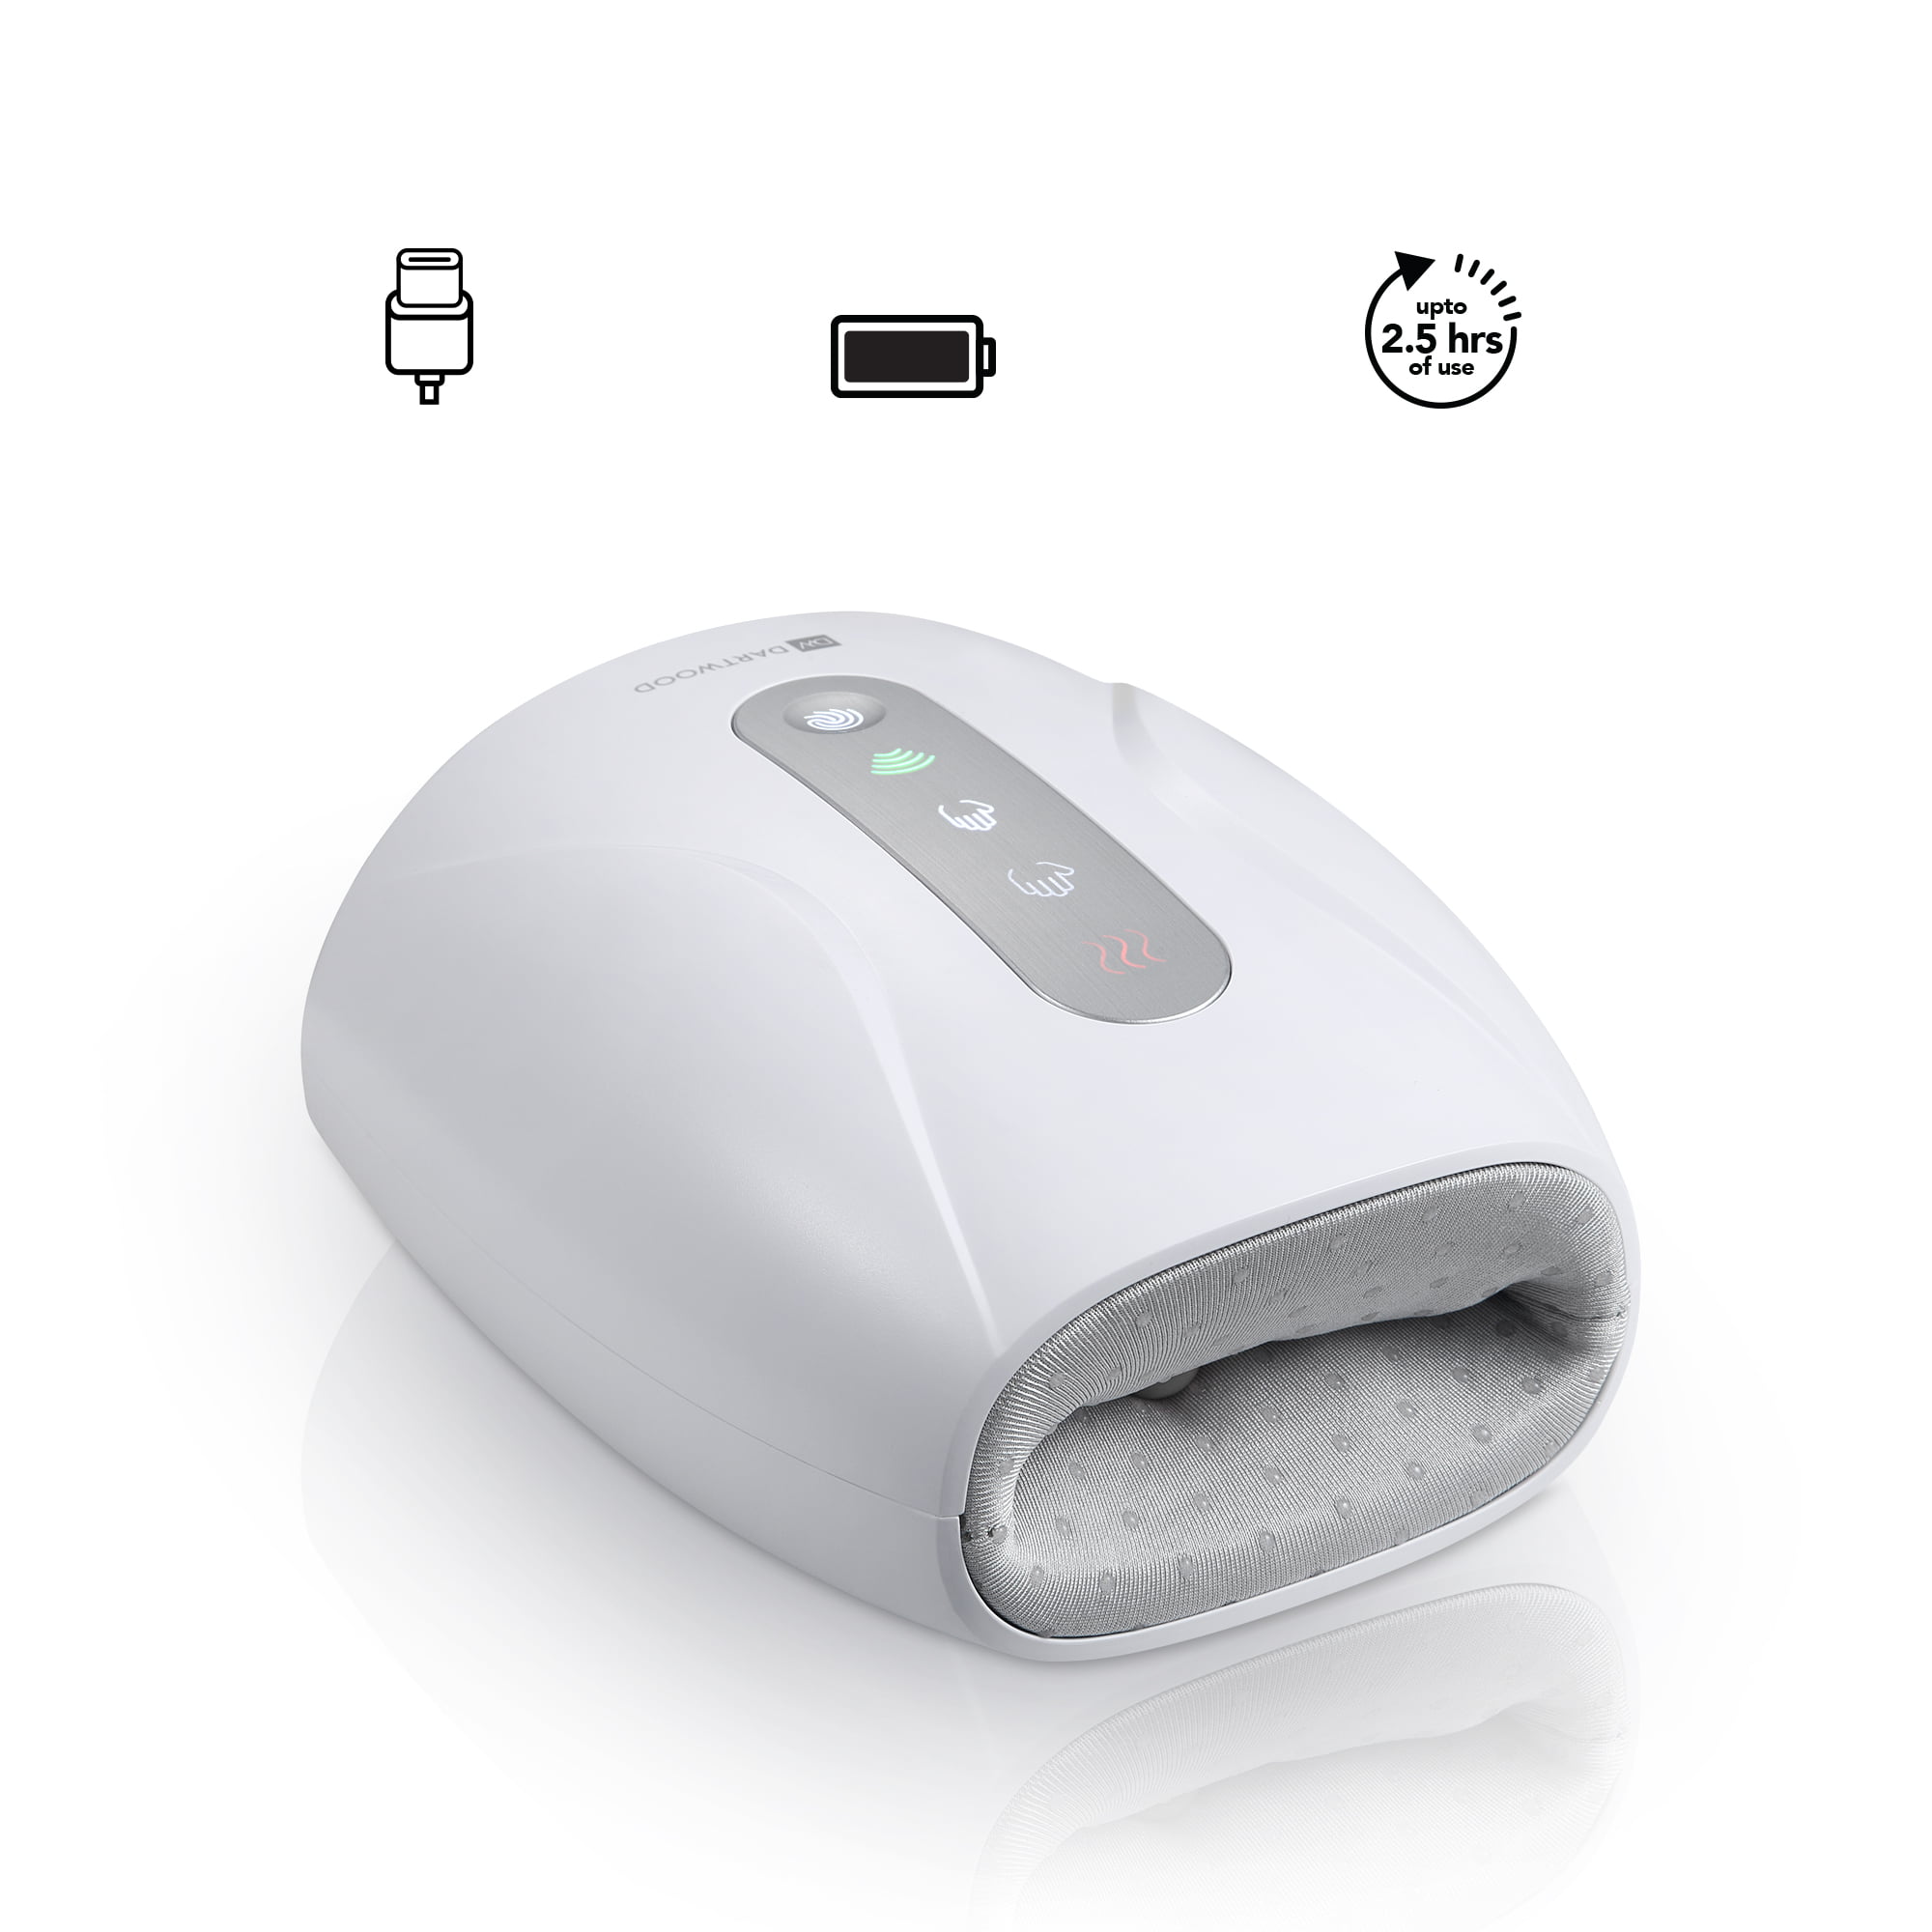 Dartwood Hand Massager with Heat and Compression - Wireless Electric Massager for Hands, Wrists, and Fingers - Cordless Hand Therapy (White)